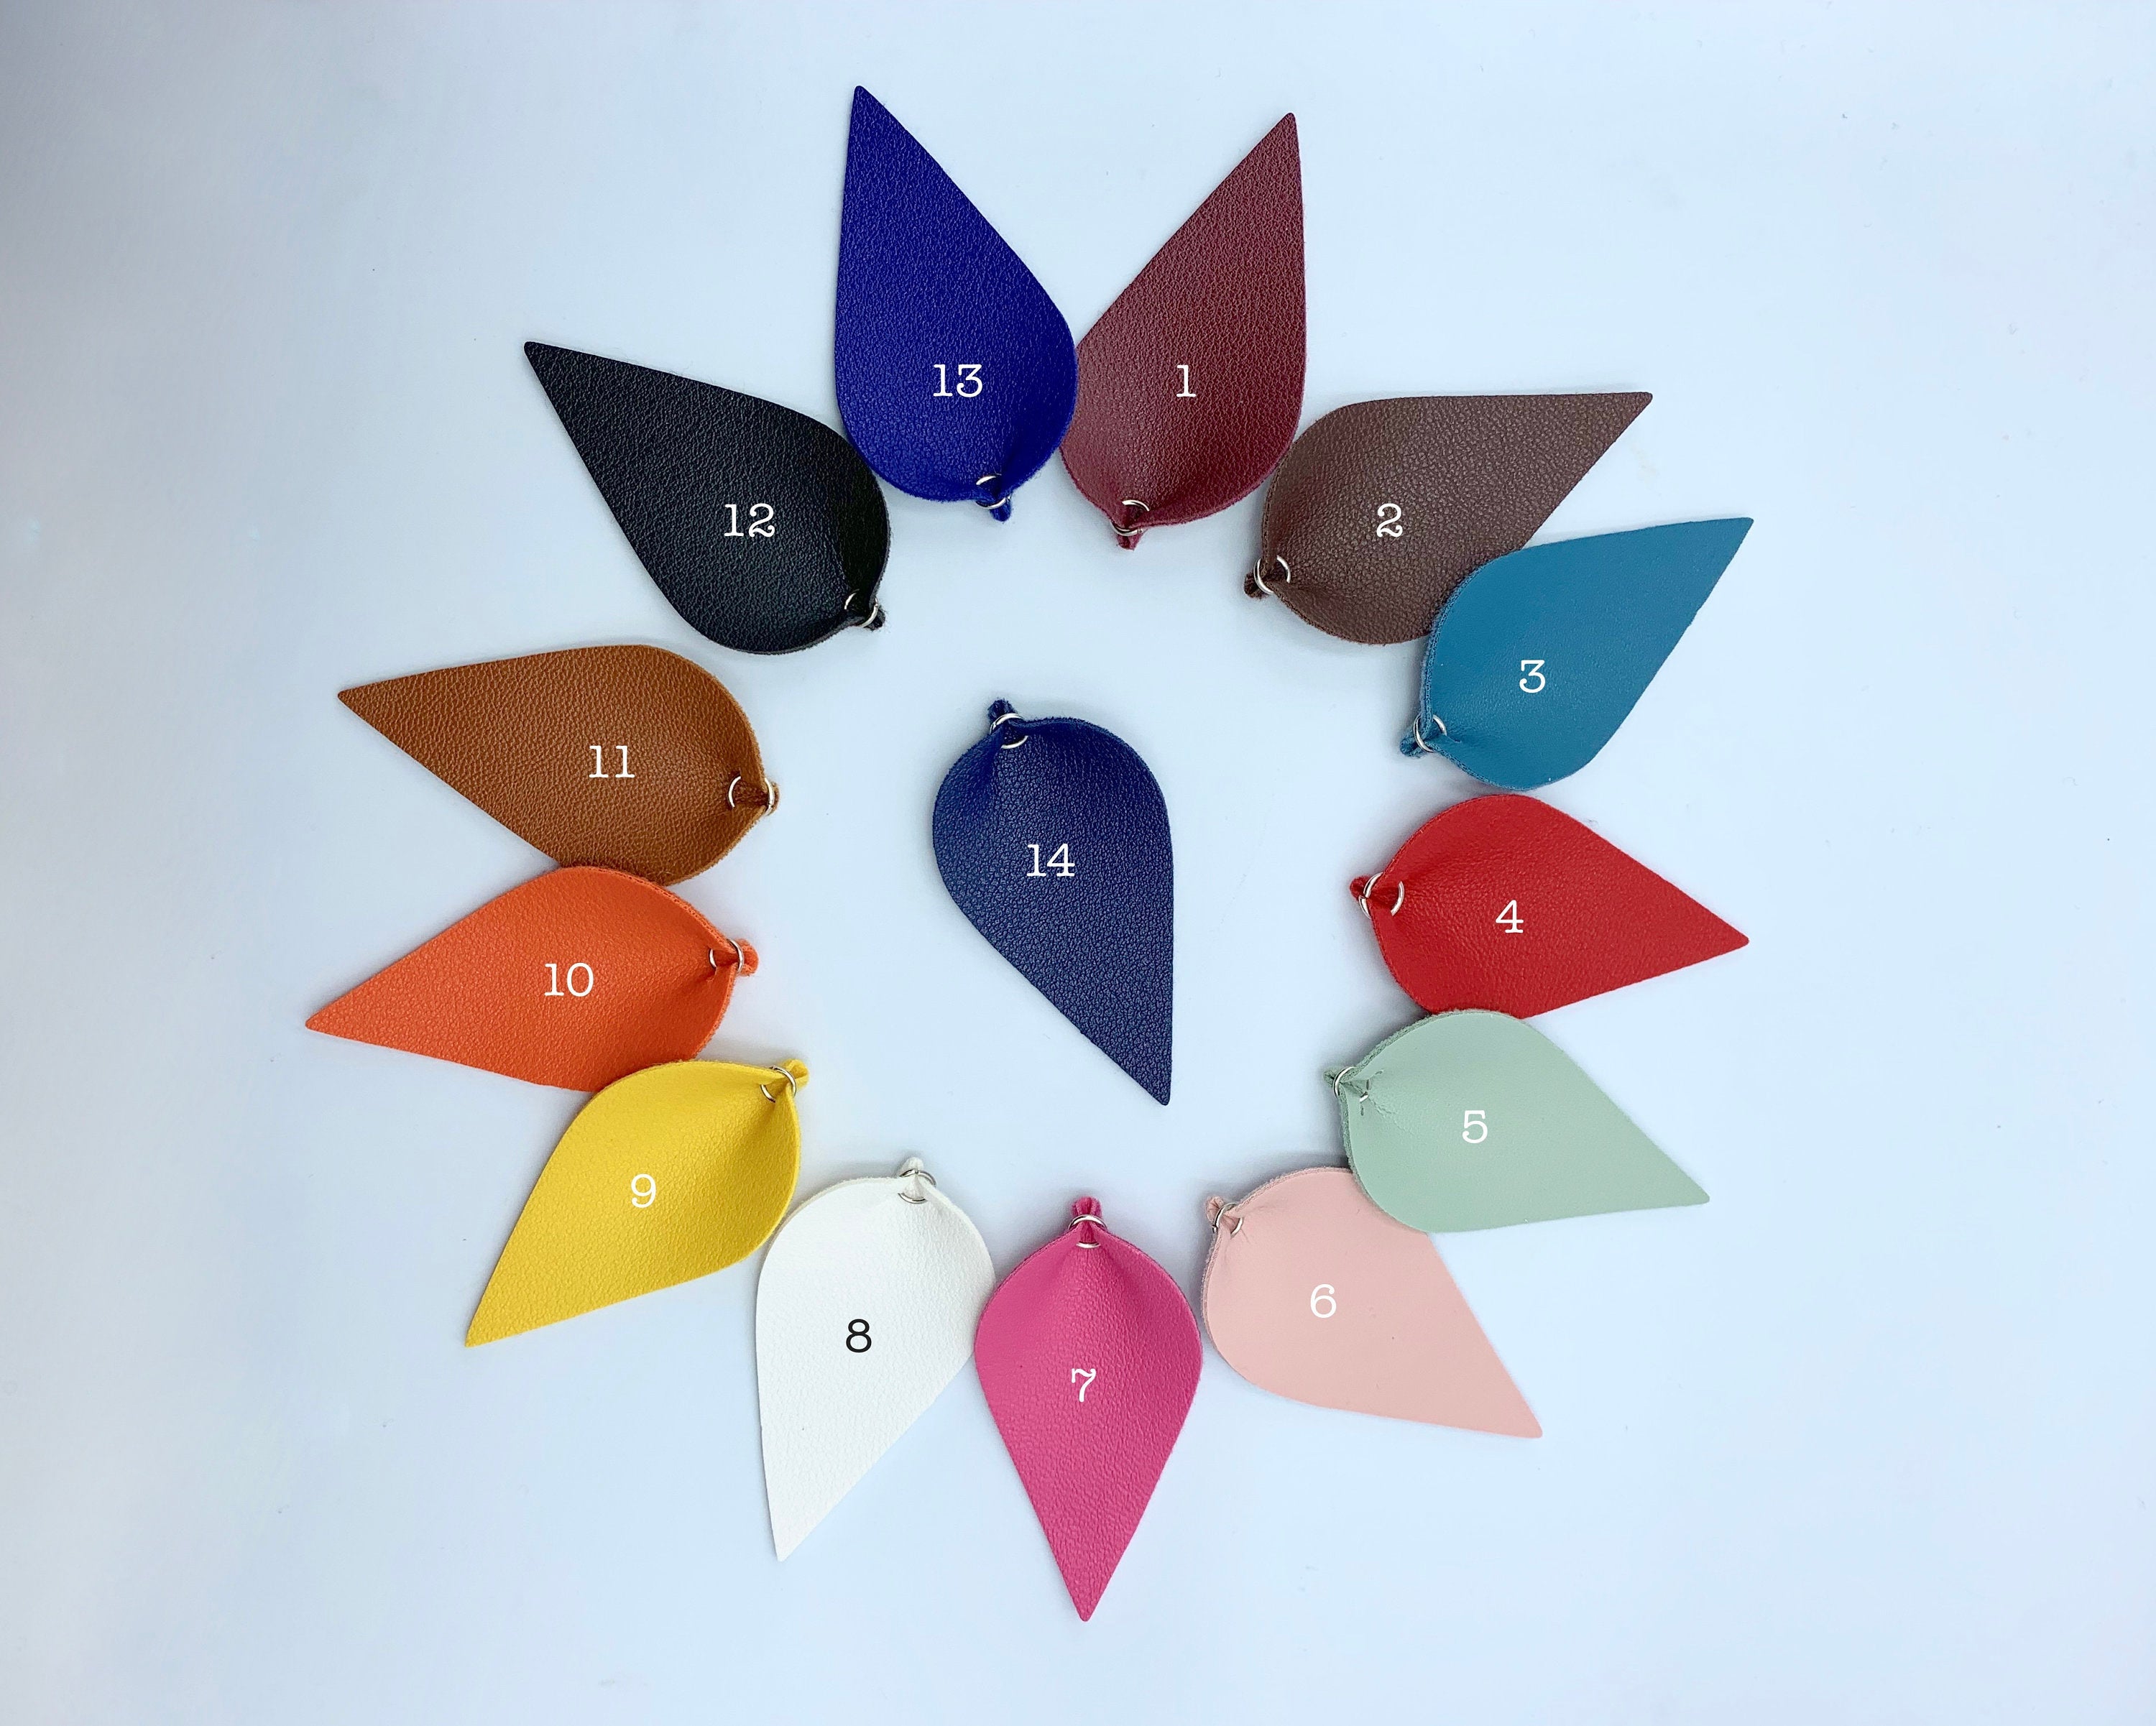 2pcs, 56x38mm, PU Leather Leaf Shaped pendant with Jump ring - choose your colour